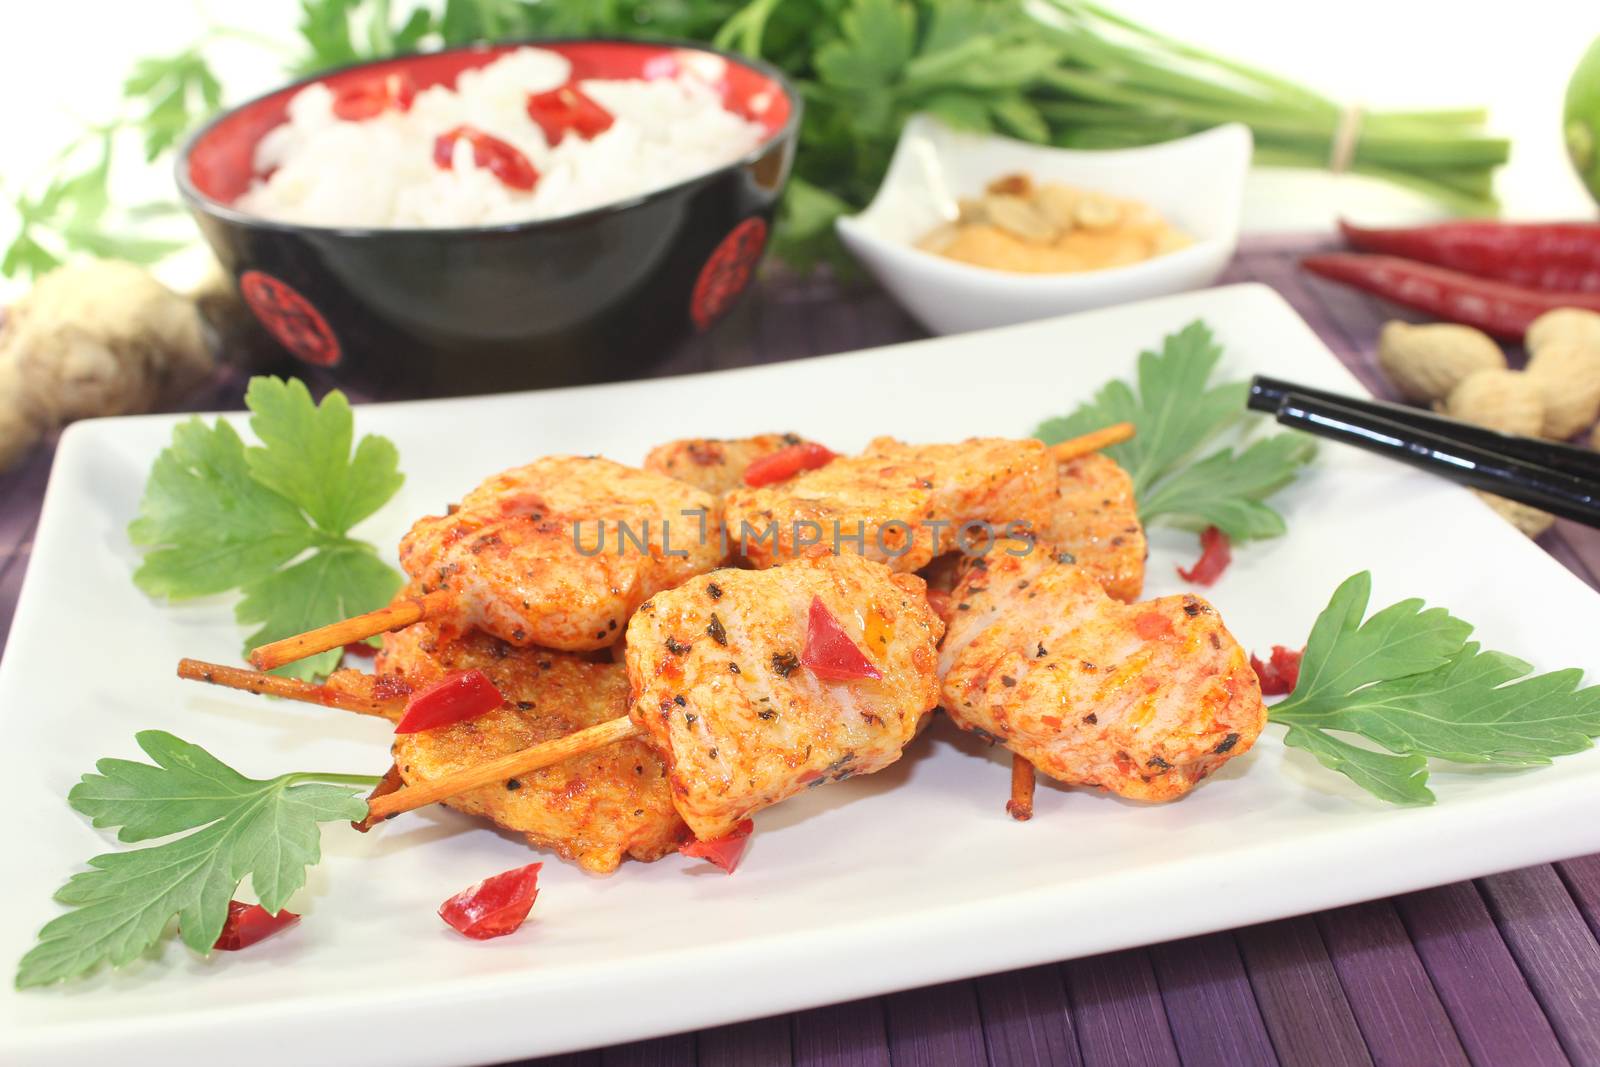 Asian satay skewers with chilli and peanut sauce by discovery